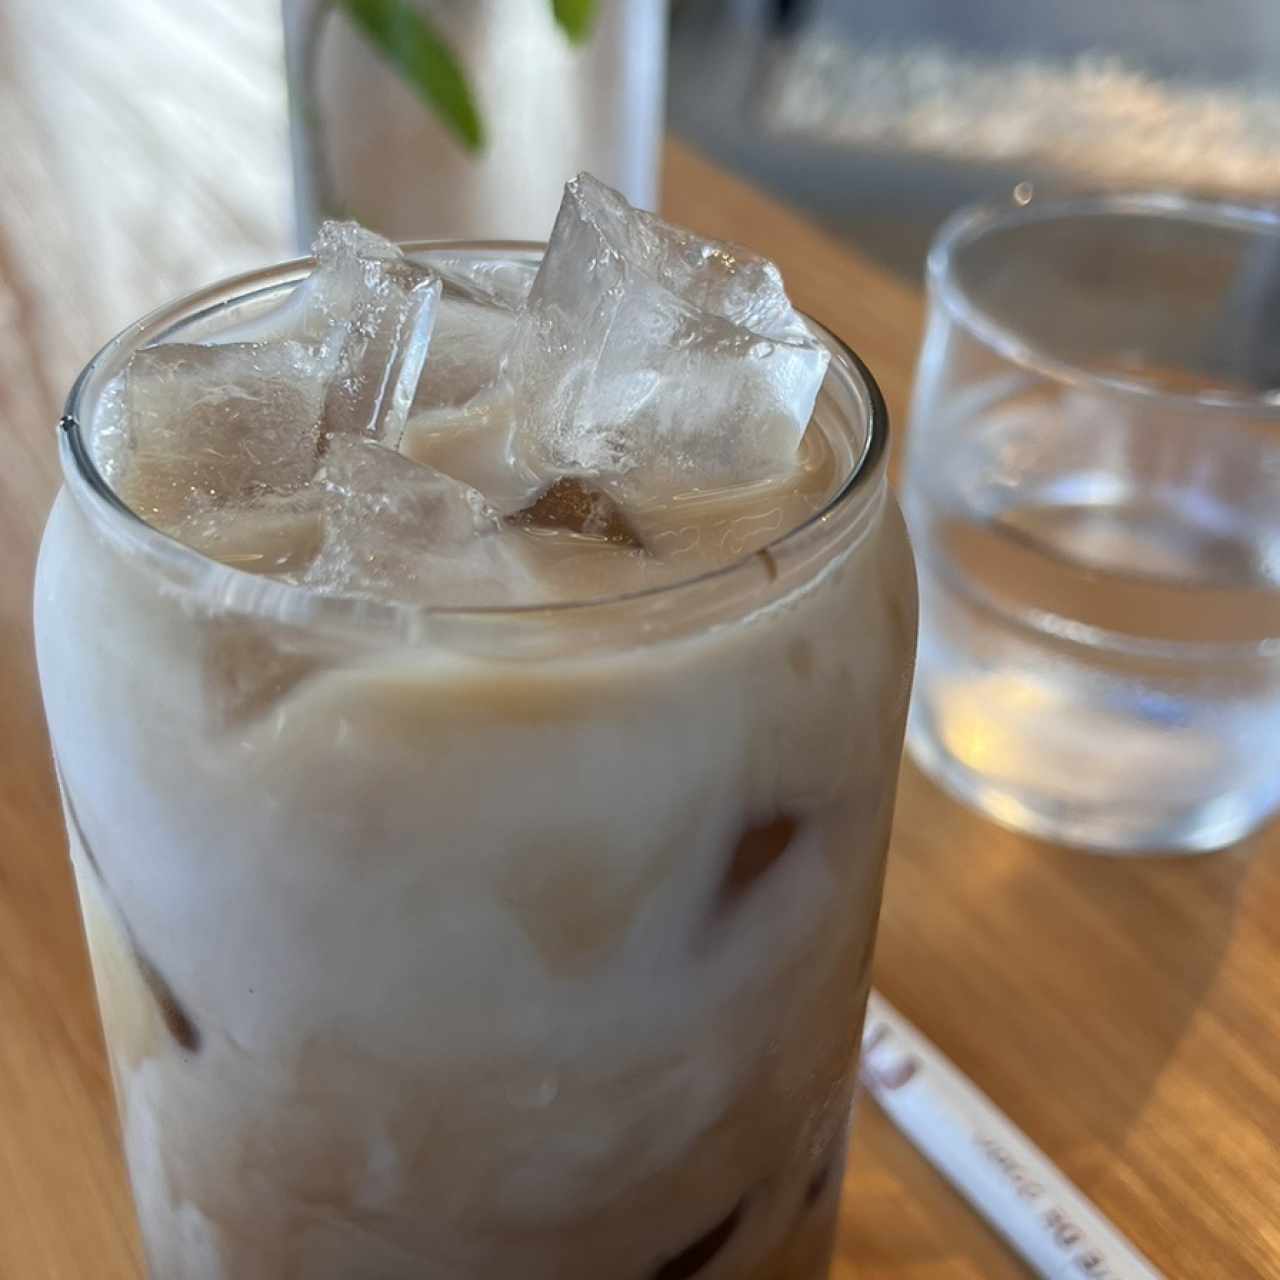 Iced moccachino